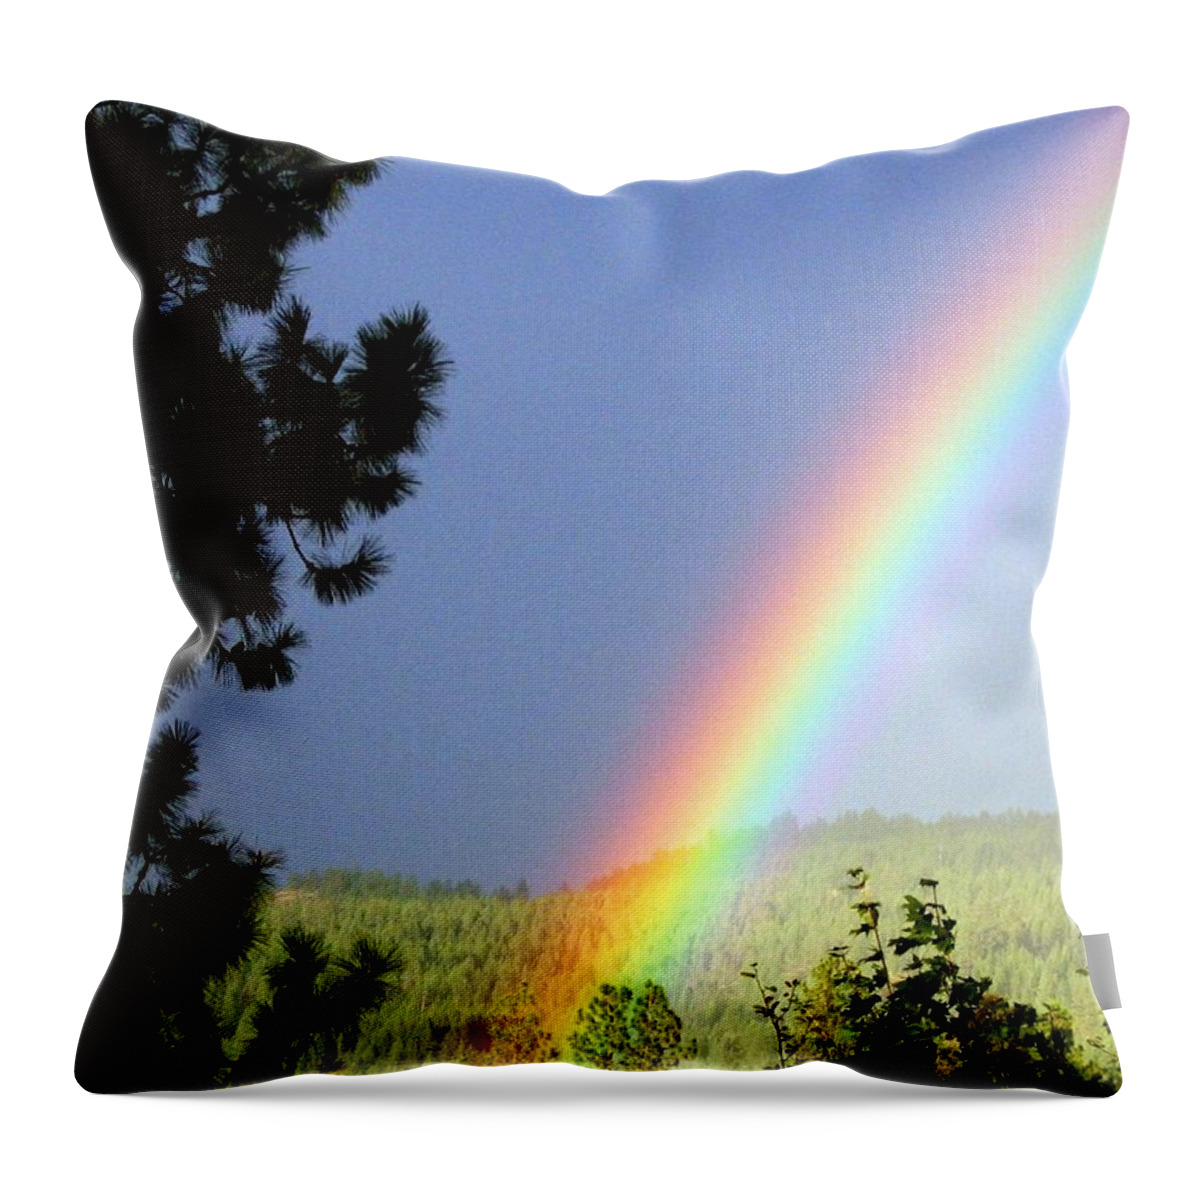 Rainbow Throw Pillow featuring the photograph Rainbow Covenant by Will Borden